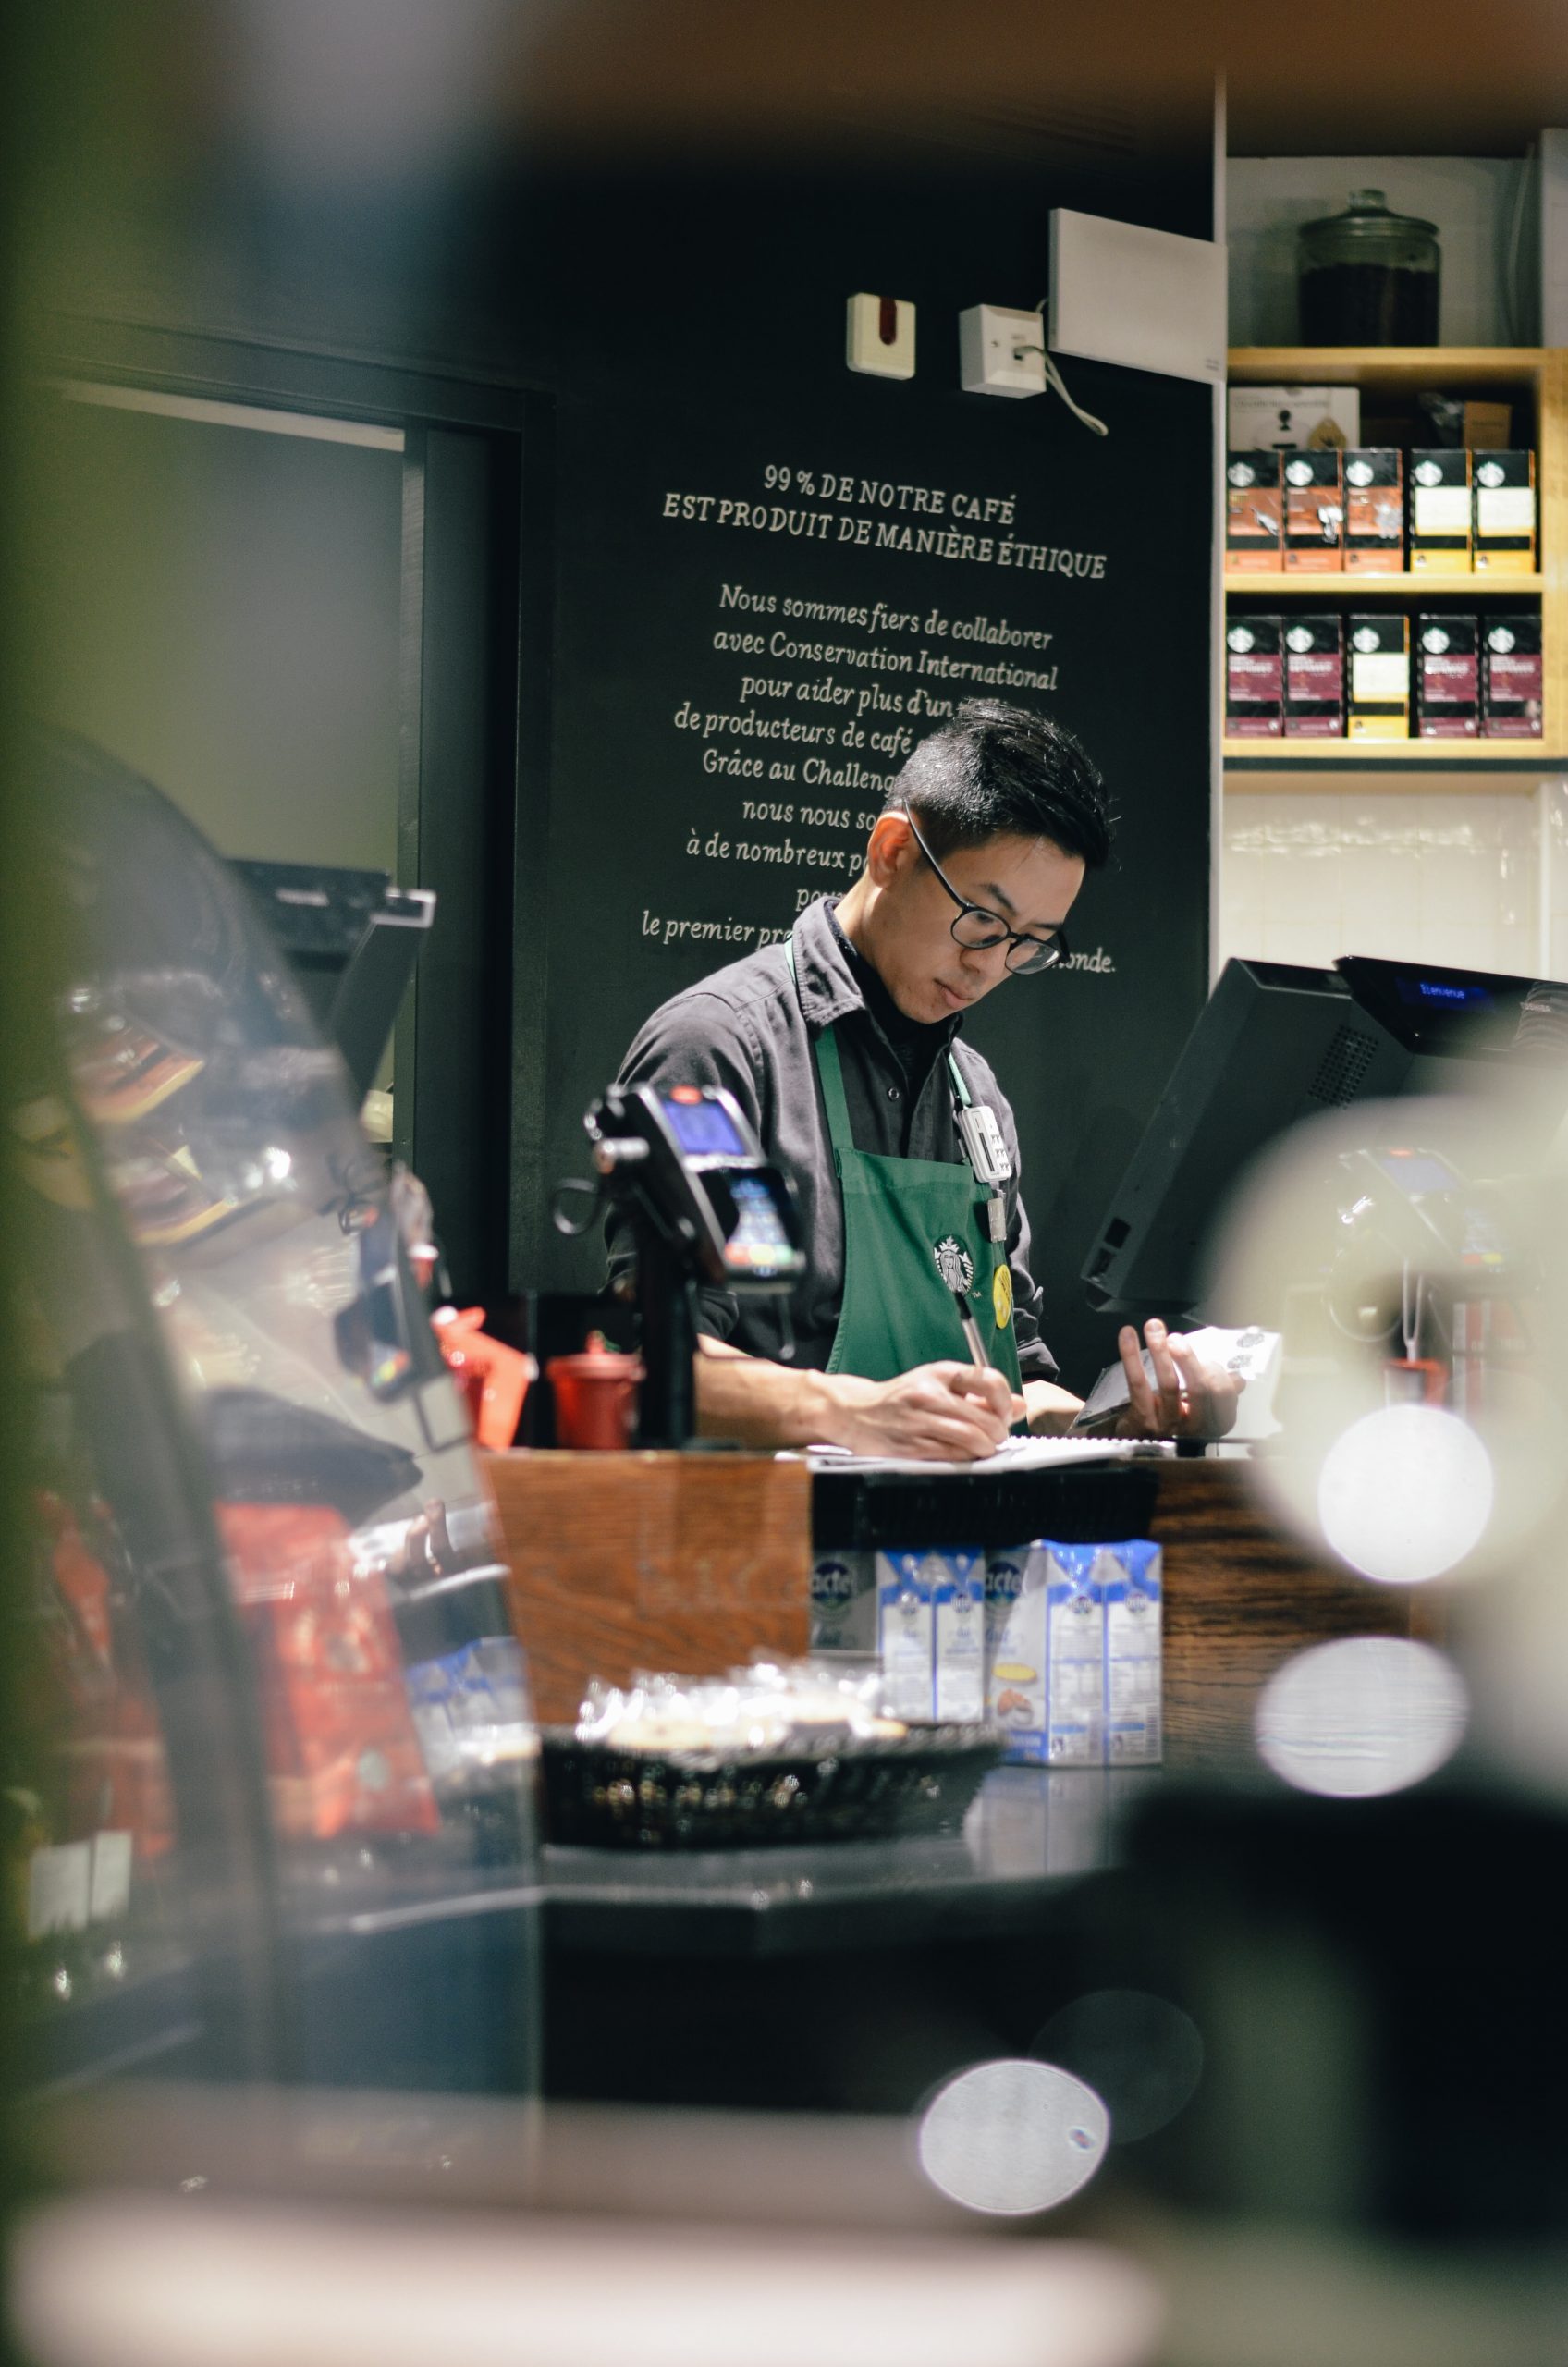 A male Starbucks barista stands behind the counter writing on paper. He is wearing a green Starbucks apron and is standing behind the cash register.